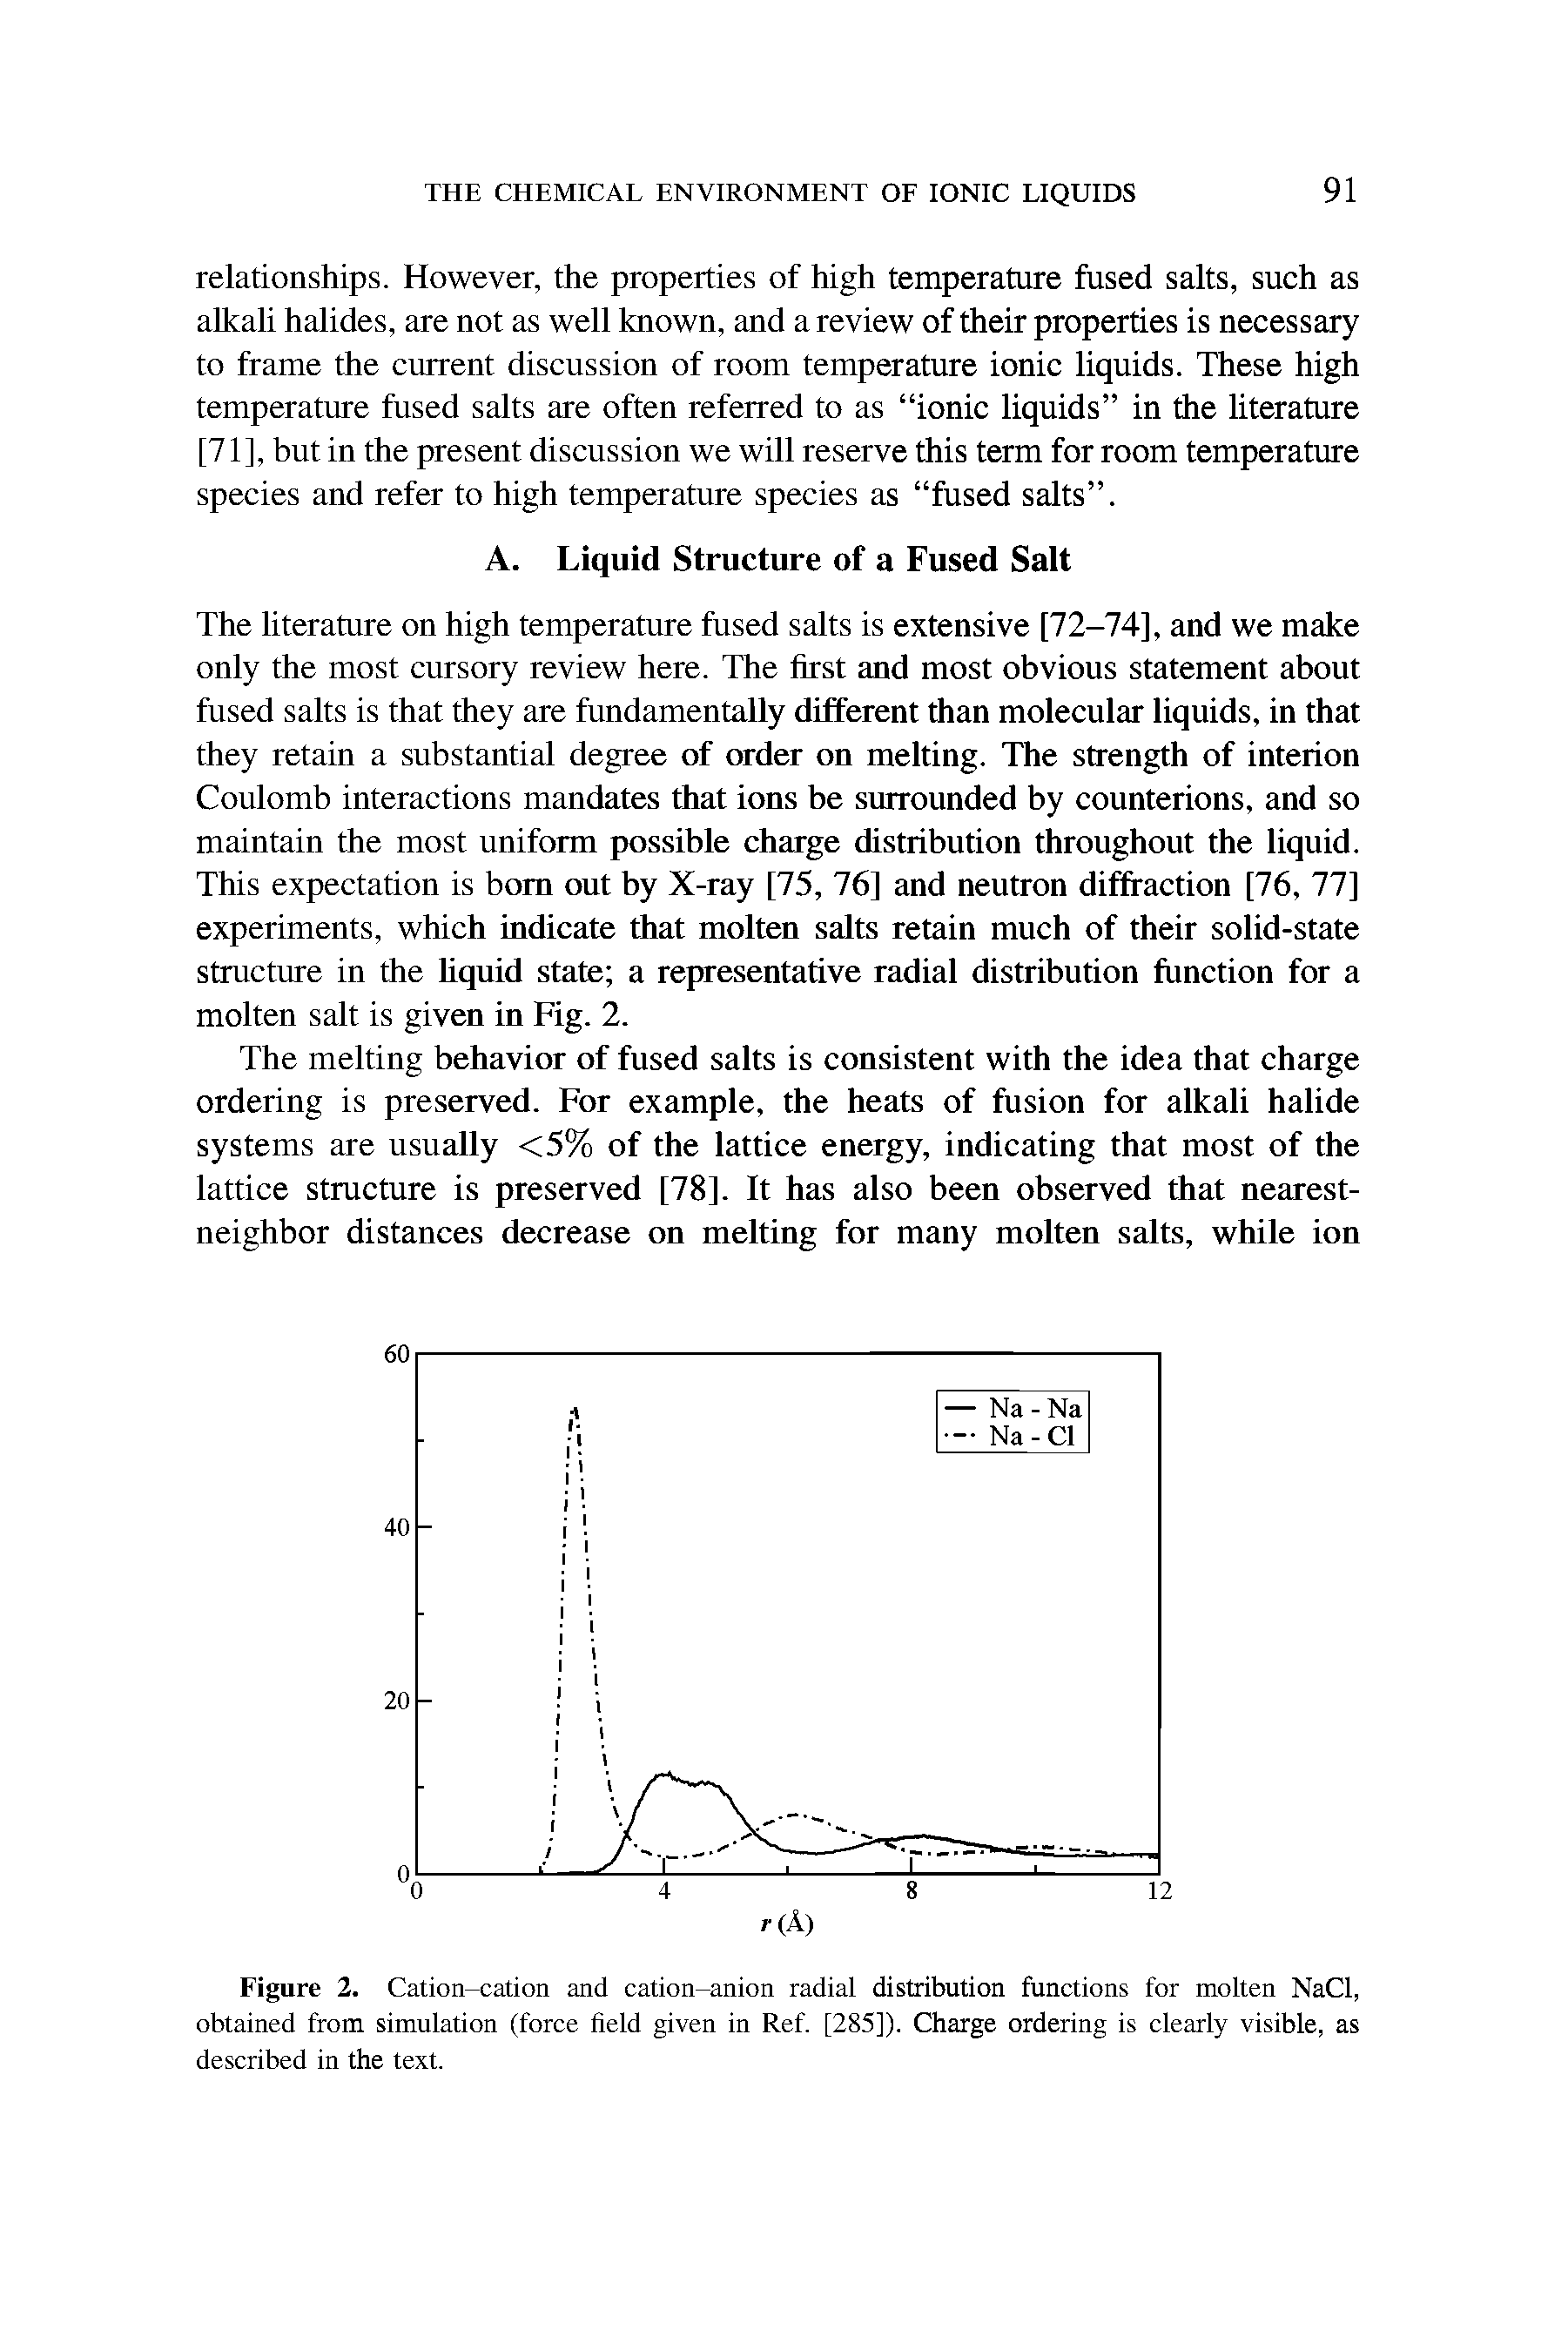 Figure 2. Cation-cation and cation-anion radial distribution functions for molten NaCl, obtained from simulation (force field given in Ref. [285]). Charge ordering is clearly visible, as described in the text.